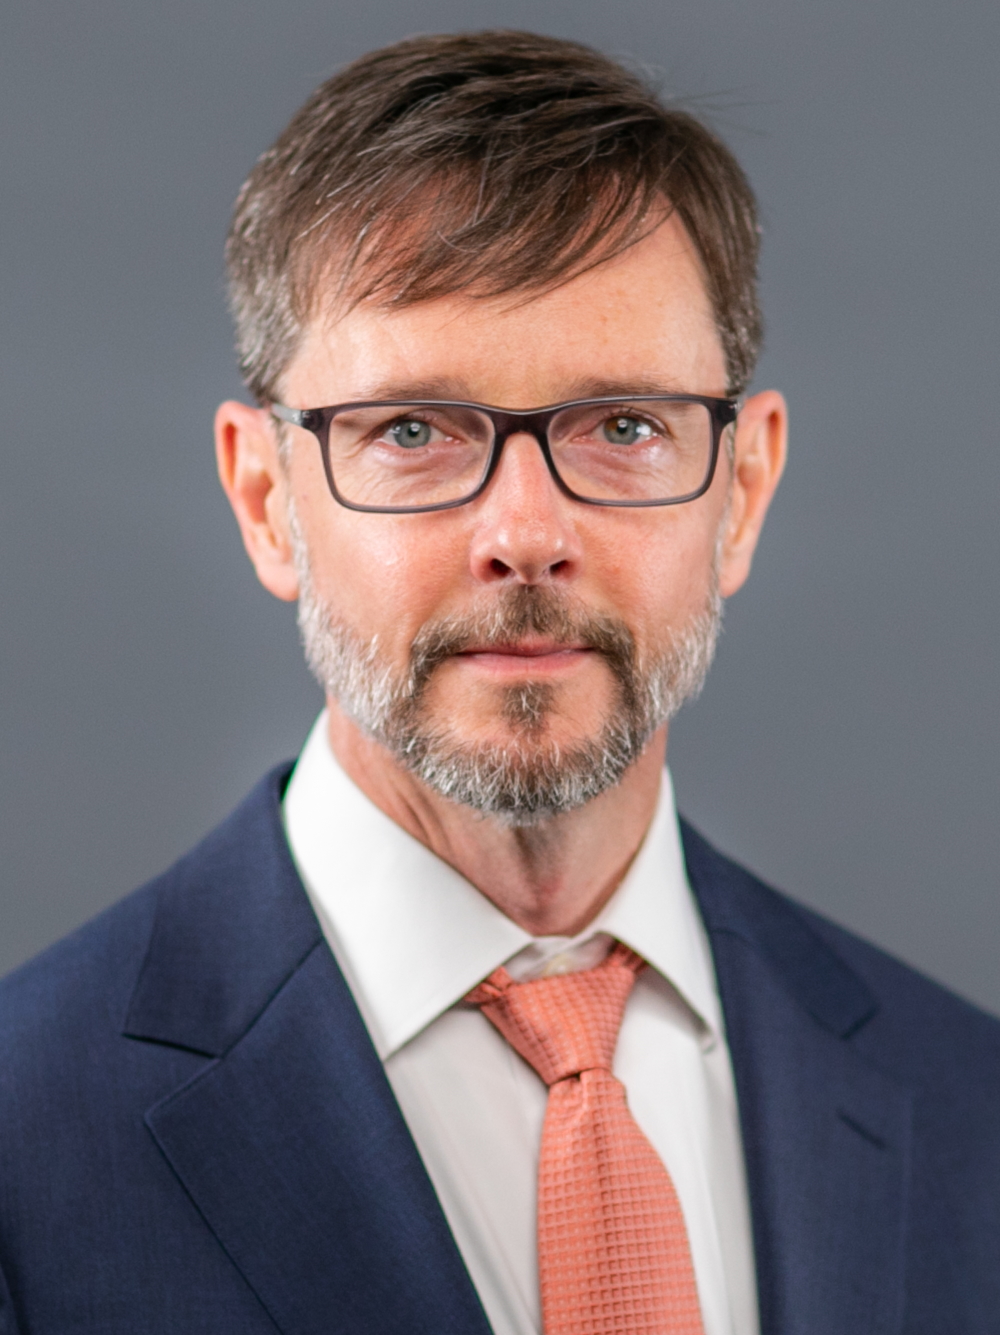 Gary Green headshot wearing dark-framed glasses, nvy suit jacket with whit shirt and coarl tie